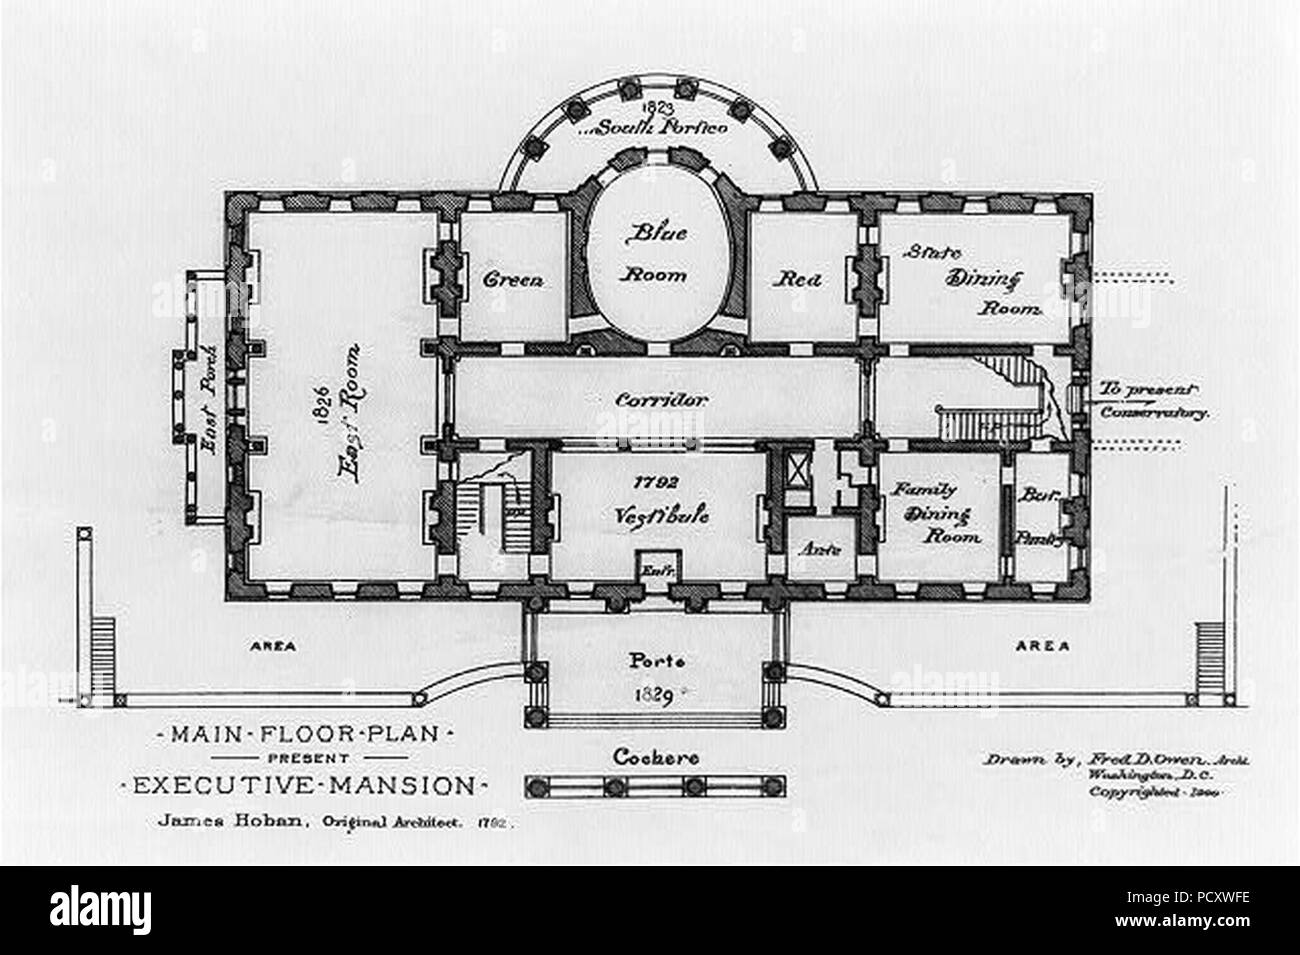 Alterations to the Executive Mansion for Mrs. Benjamin Harrison Pennsylvania Avenue N.W. Washington D.C. Main floor plan measured drawing) - drawn by Fred D. Owen archt. Washington Stock Photo